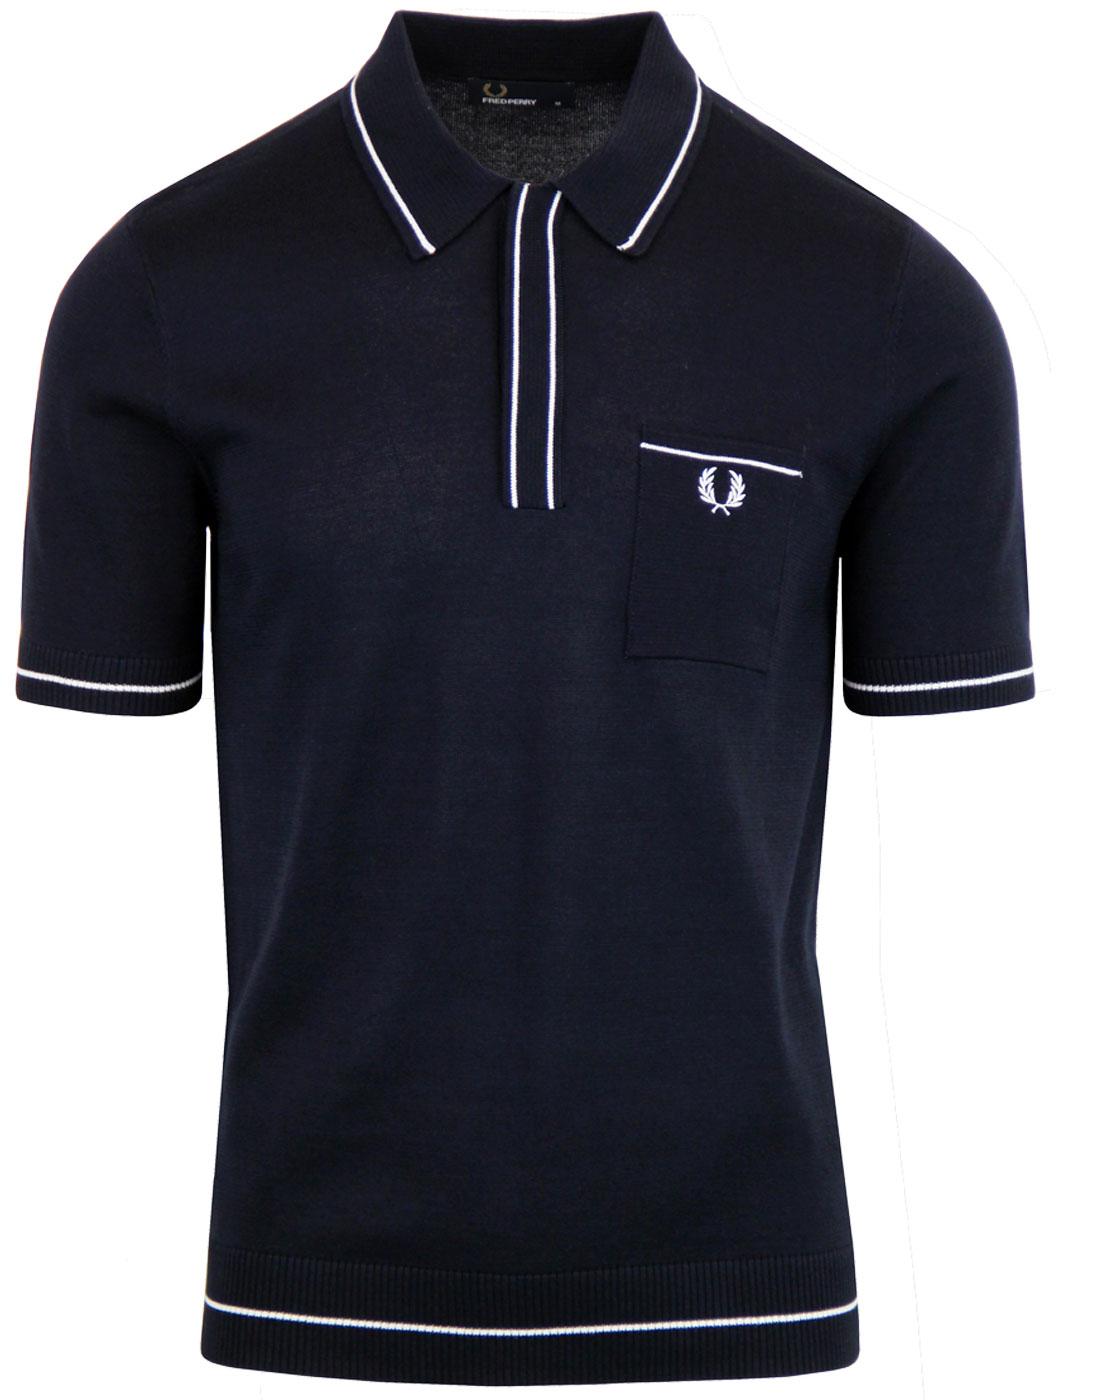 FRED PERRY Retro Mod Fine Tipped Knitted Polo